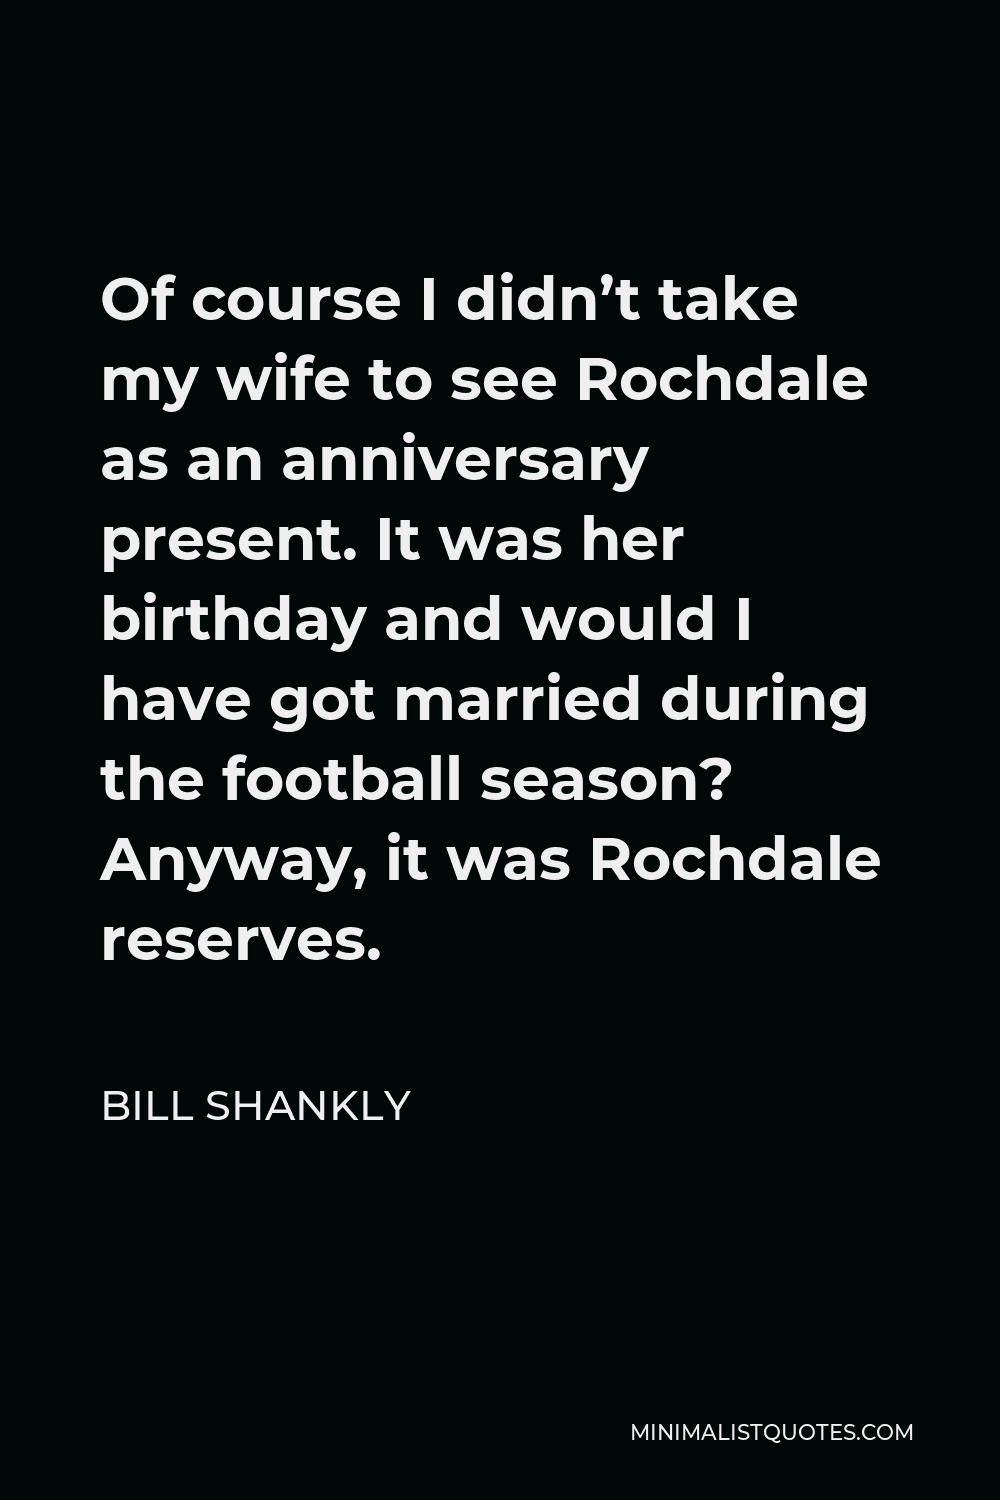 Bill Shankly Quote - Of course I didn’t take my wife to see Rochdale as an anniversary present. It was her birthday and would I have got married during the football season? Anyway, it was Rochdale reserves.